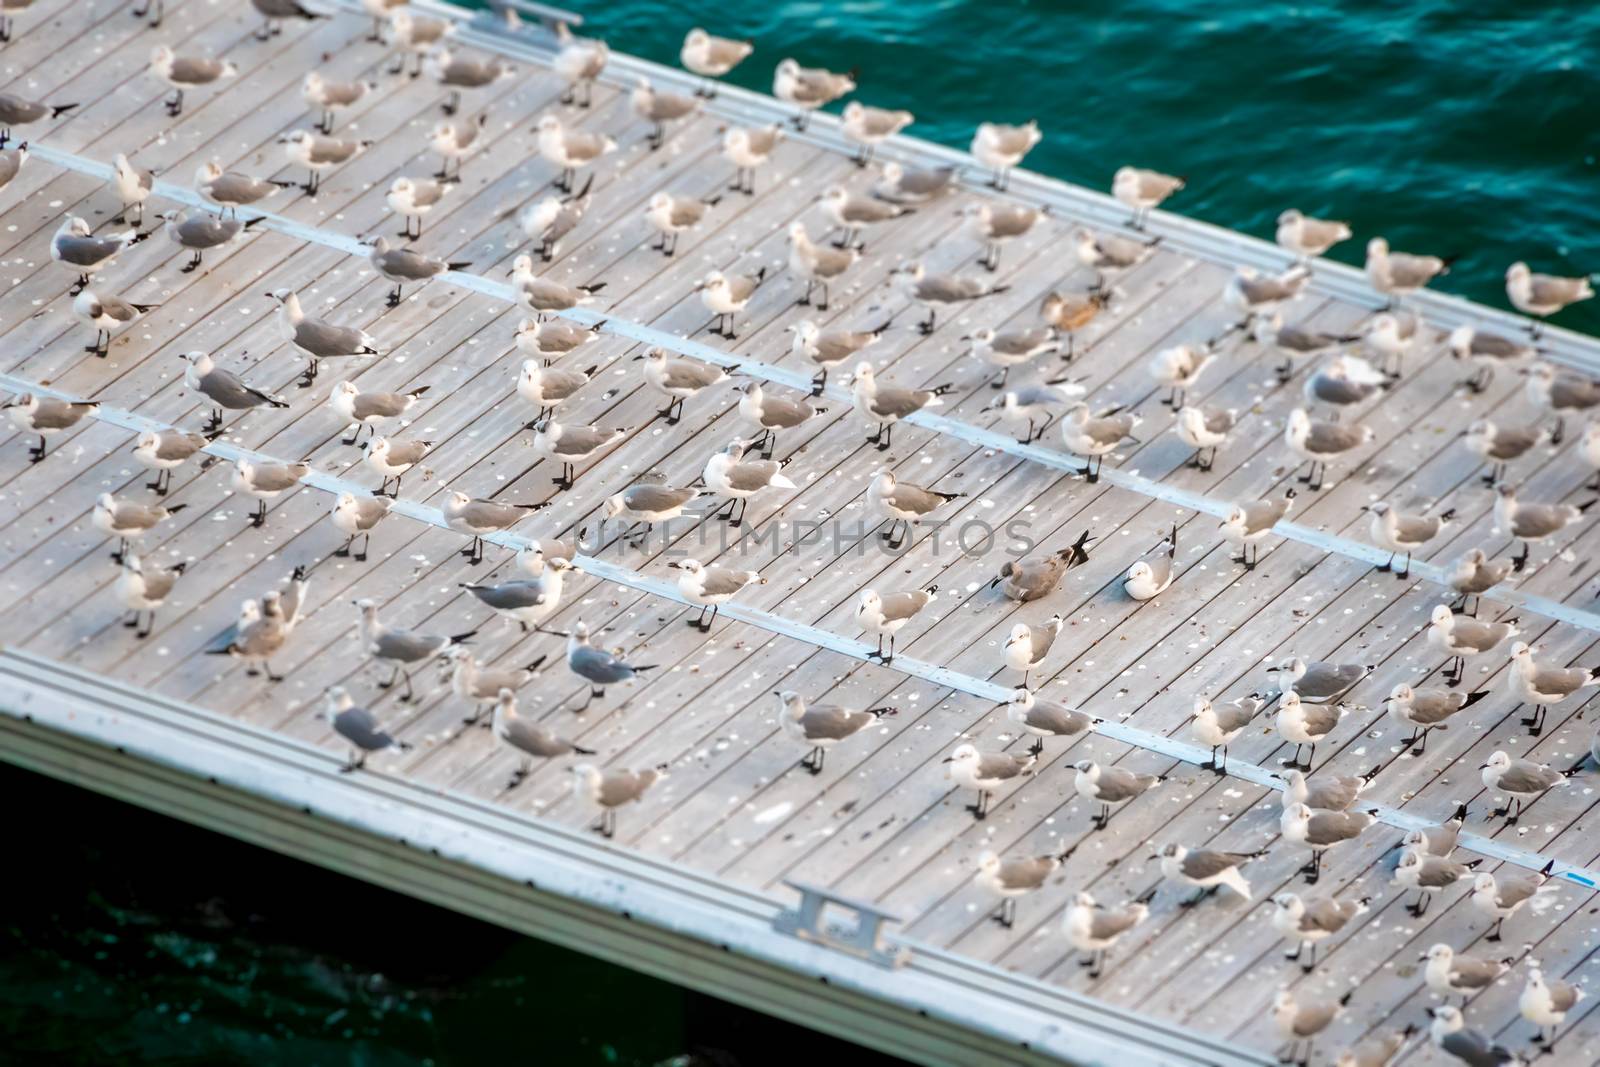 A flock of seagulls gathering on the pier to rest and groom.